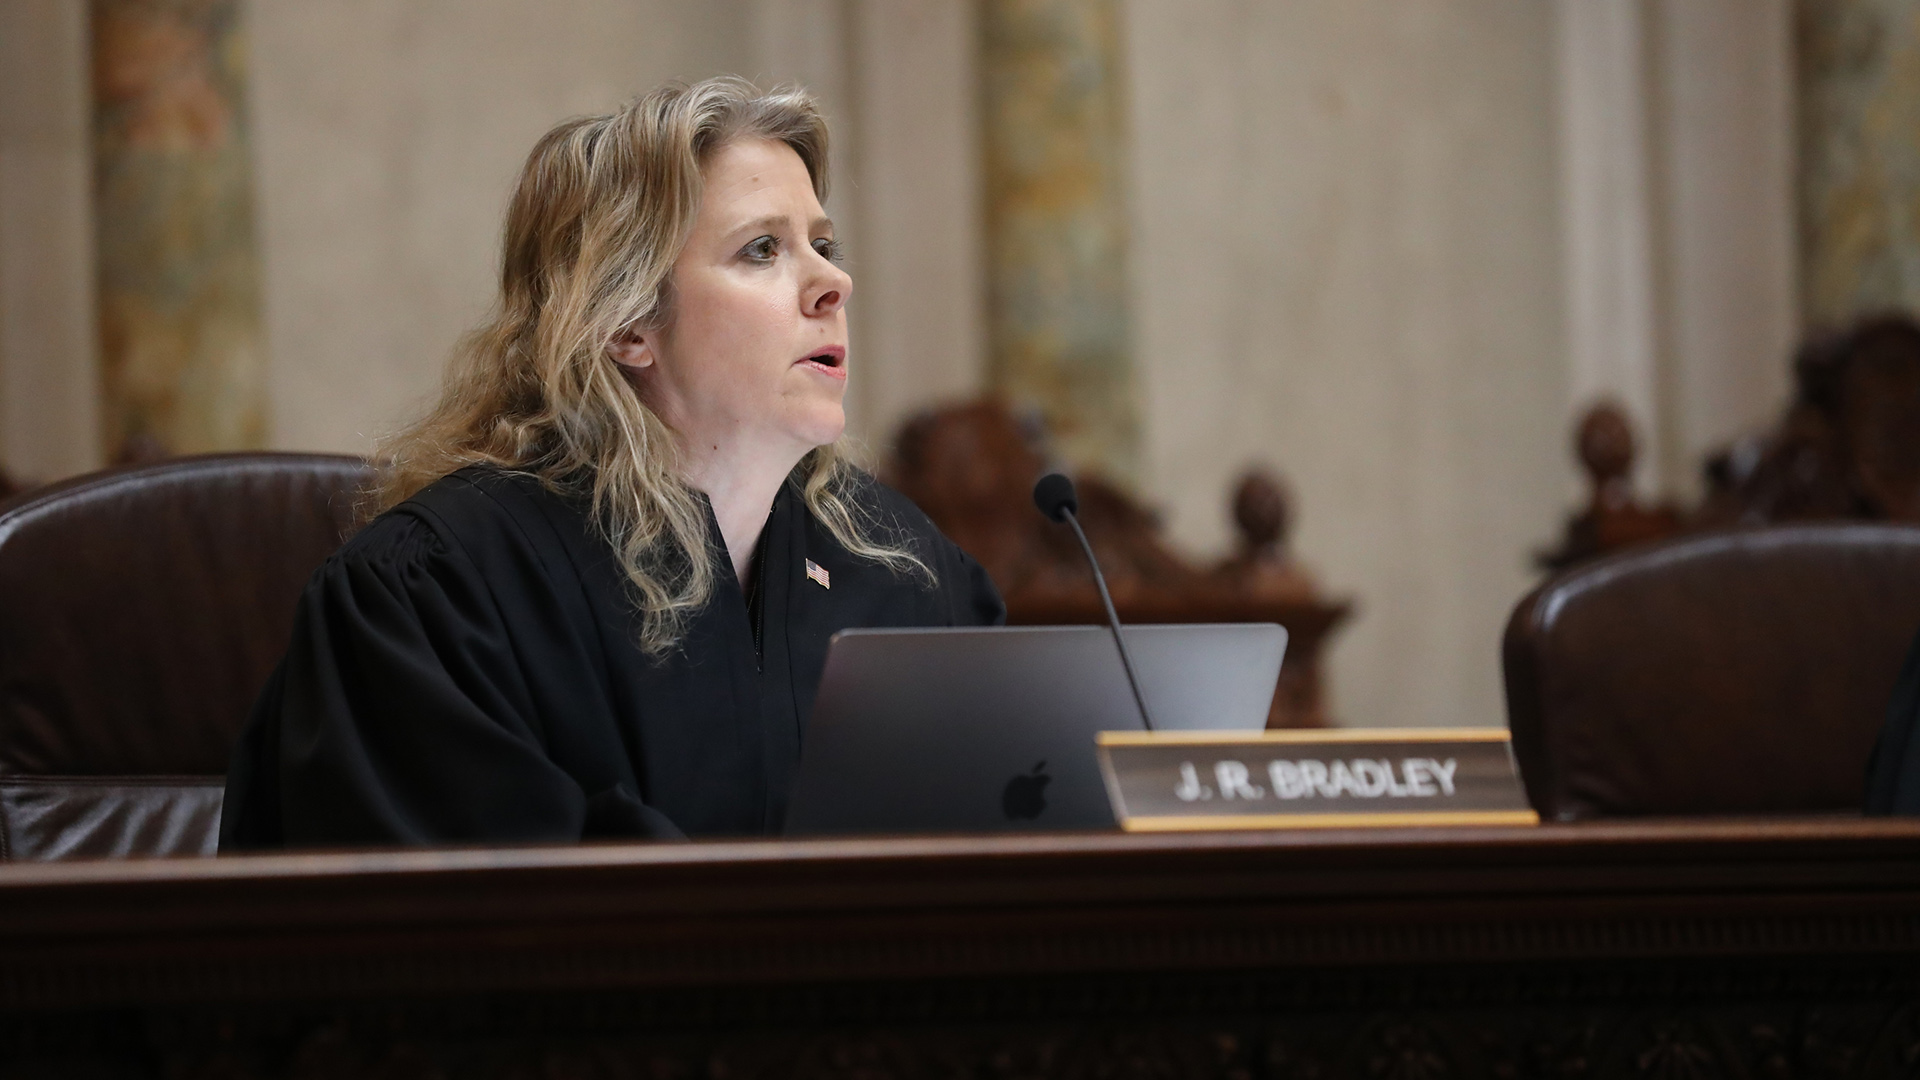 Rebecca Bradley sits in a high-backed leather chair behind a judicial bench and speaks into a mounted microphone while facing an open laptop computer, in a room with marble masonry.